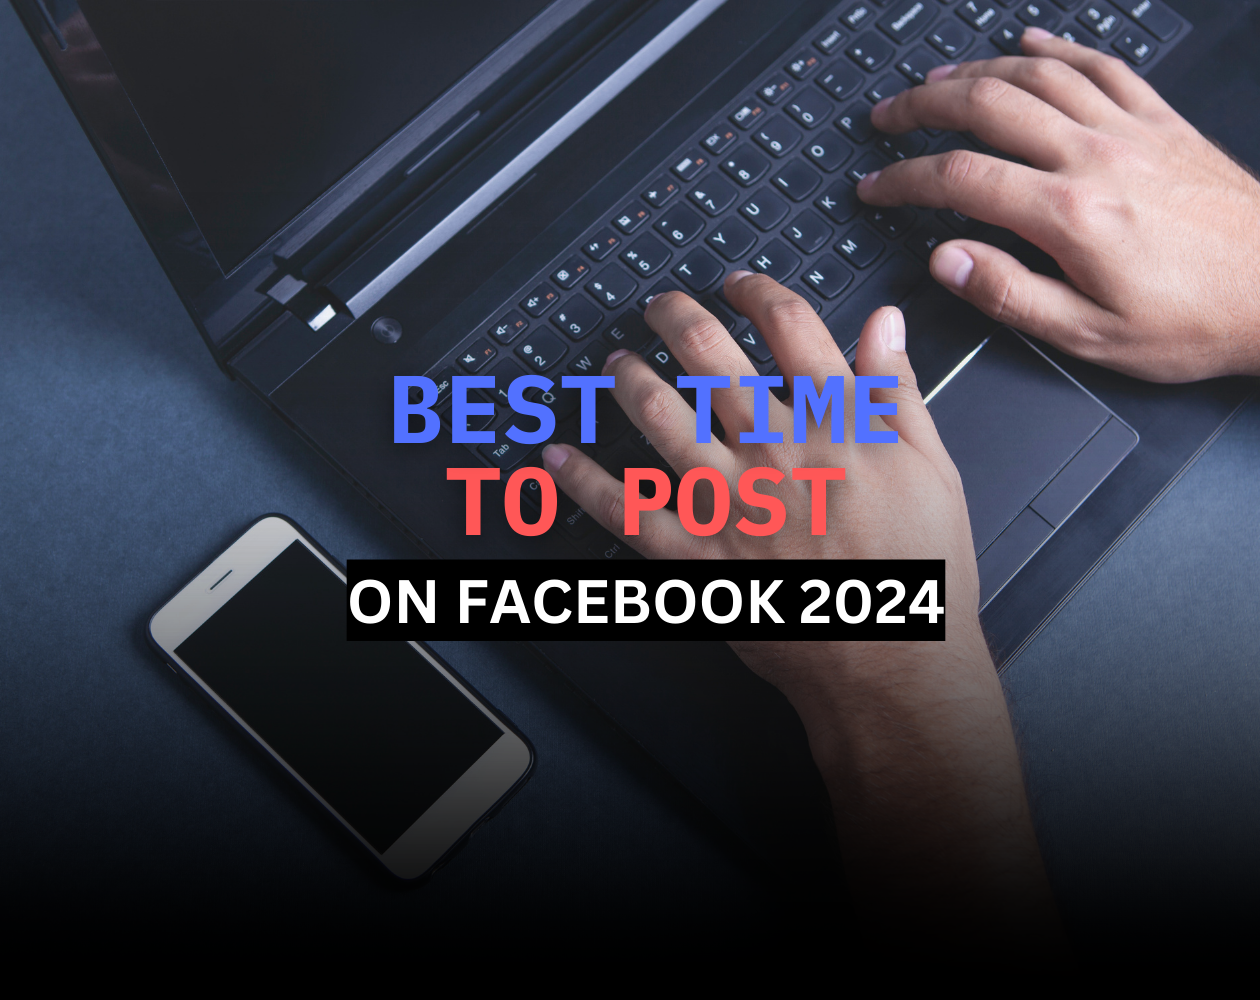 BEST TIME TO POST ON FACEBOOK 2024   Determining the best time to post on Facebook is crucial for content creators and businesses looking to maximize their reach and engagement. With over 3.05 billion monthly active users, nailing your Facebook posting sc